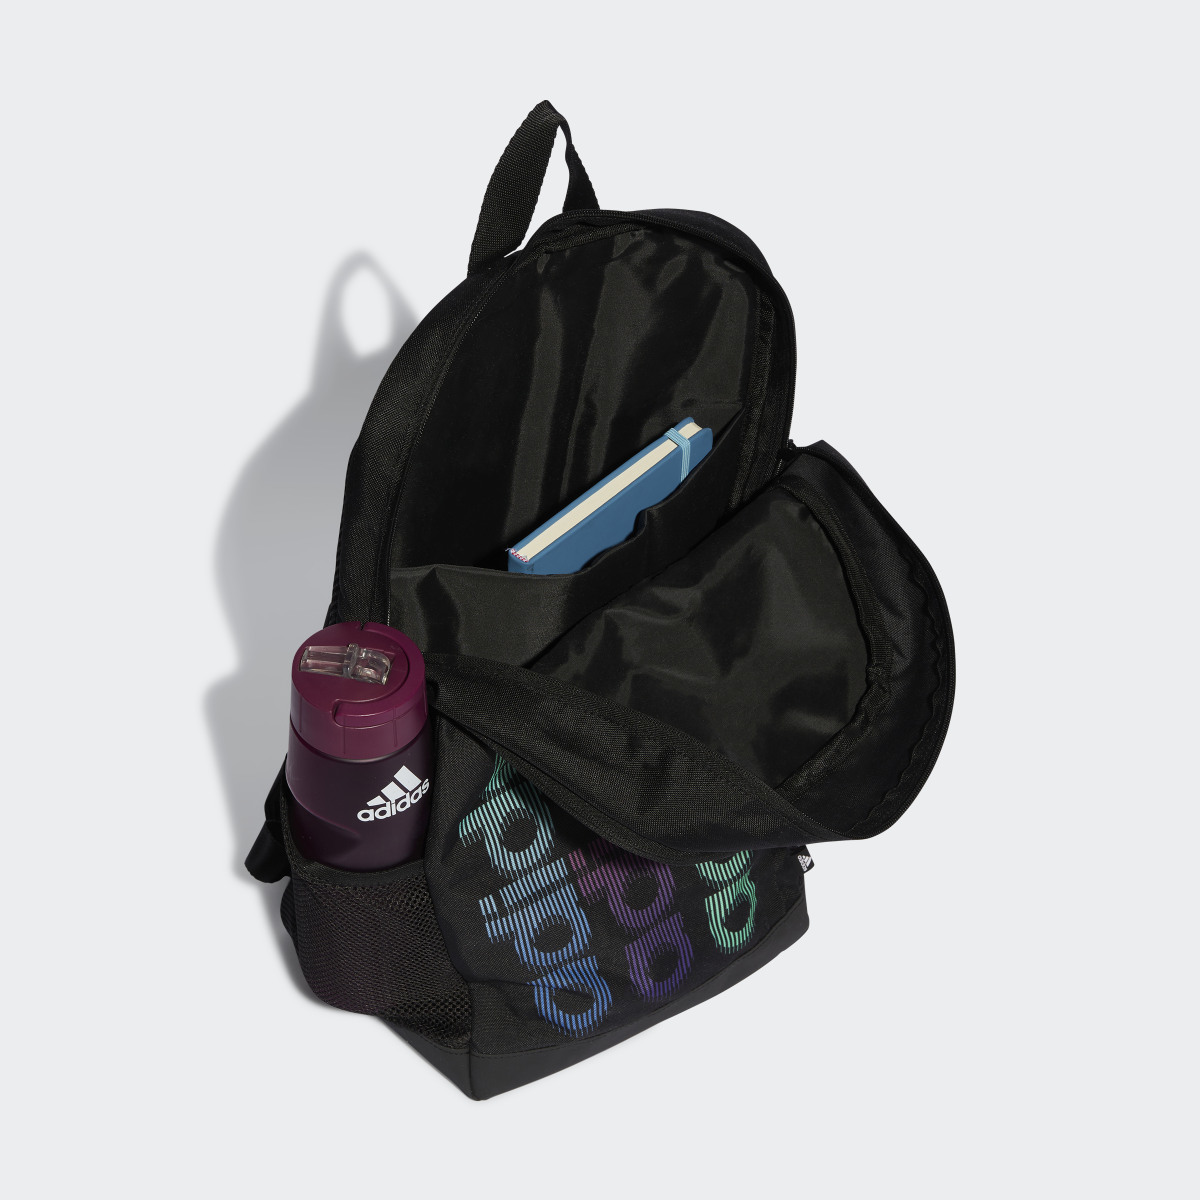 Adidas Motion Linear Graphic Backpack. 5